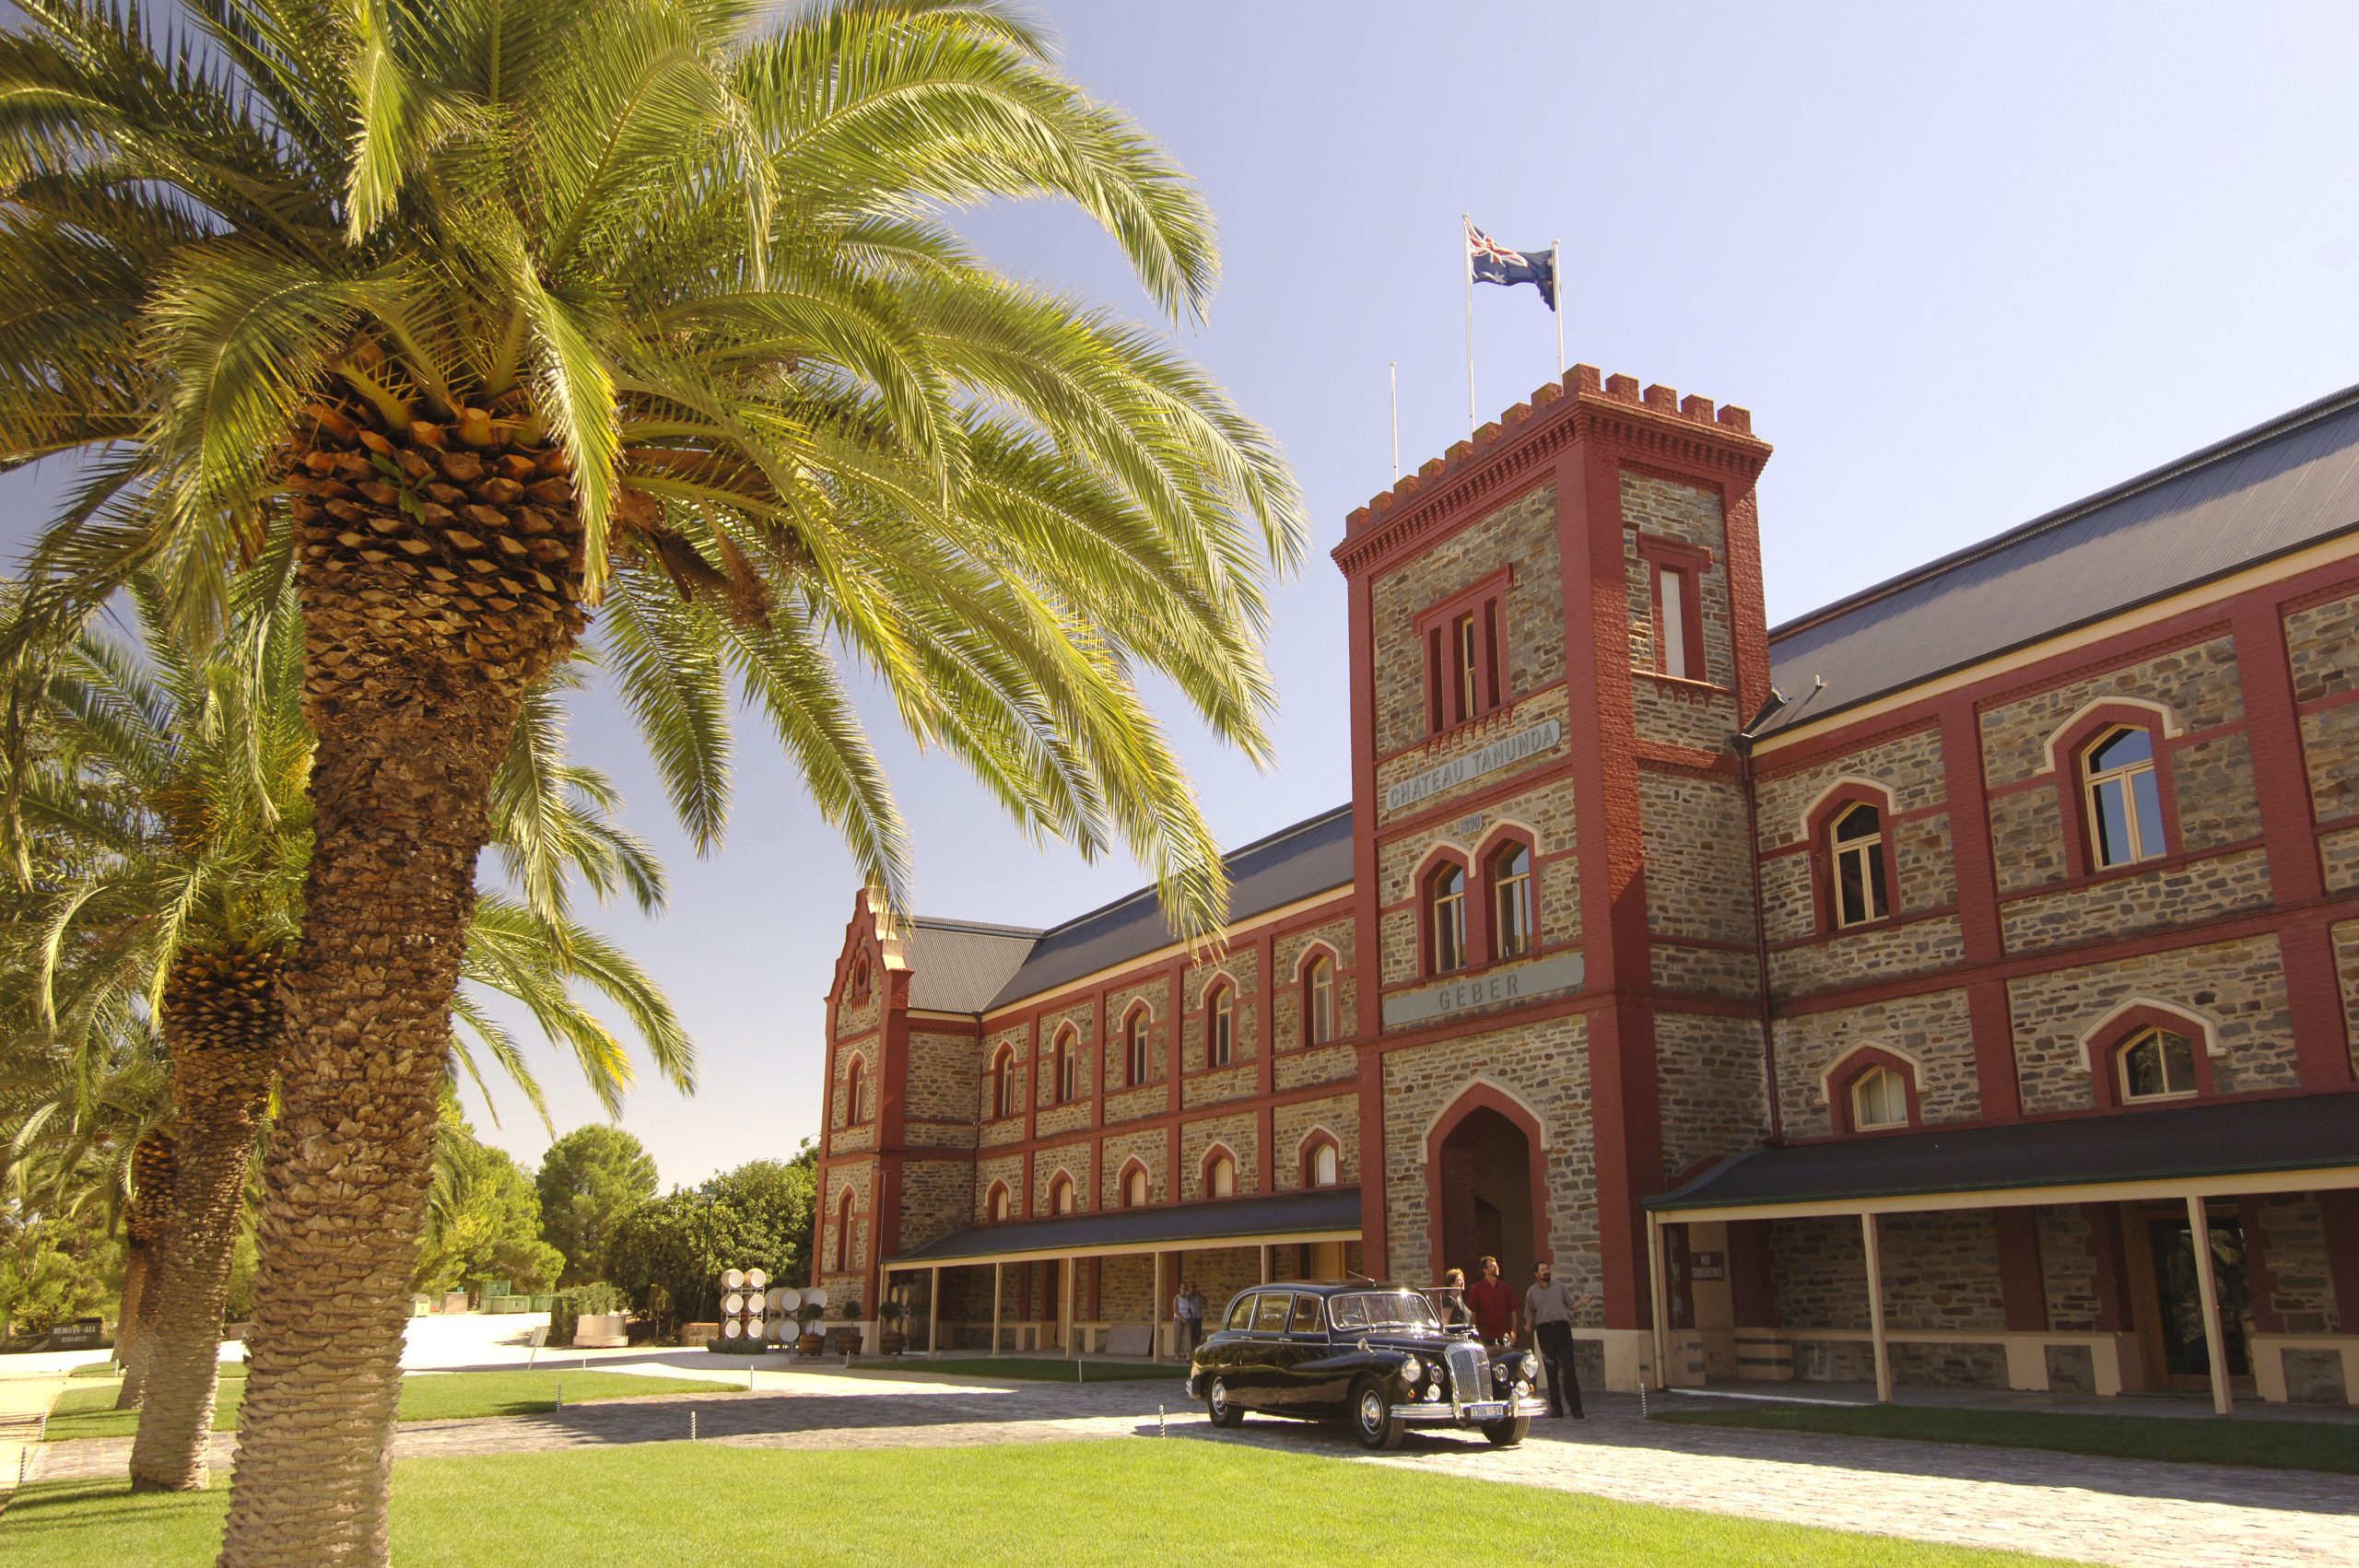 WIN an incredible experience filled with wine for two people at the iconic Château Tanunda in the Barossa